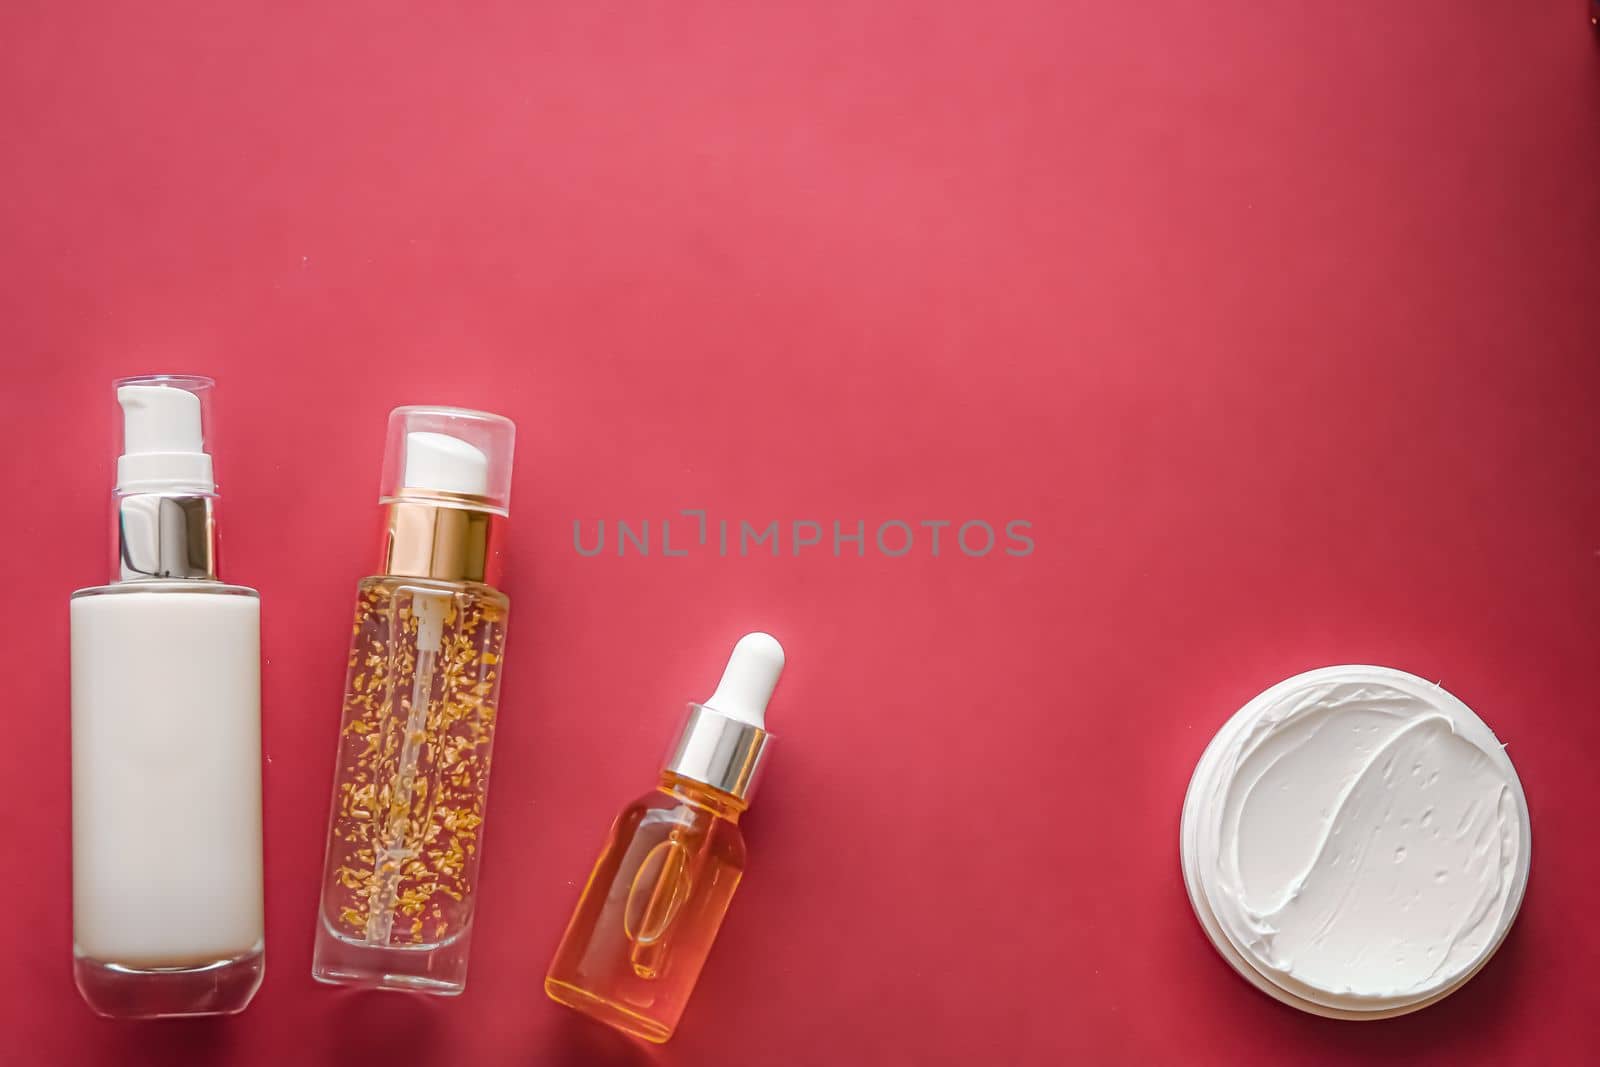 Skincare cosmetics and anti-aging beauty products, luxury skin care bottles, oil, serum and face cream on coral background by Anneleven